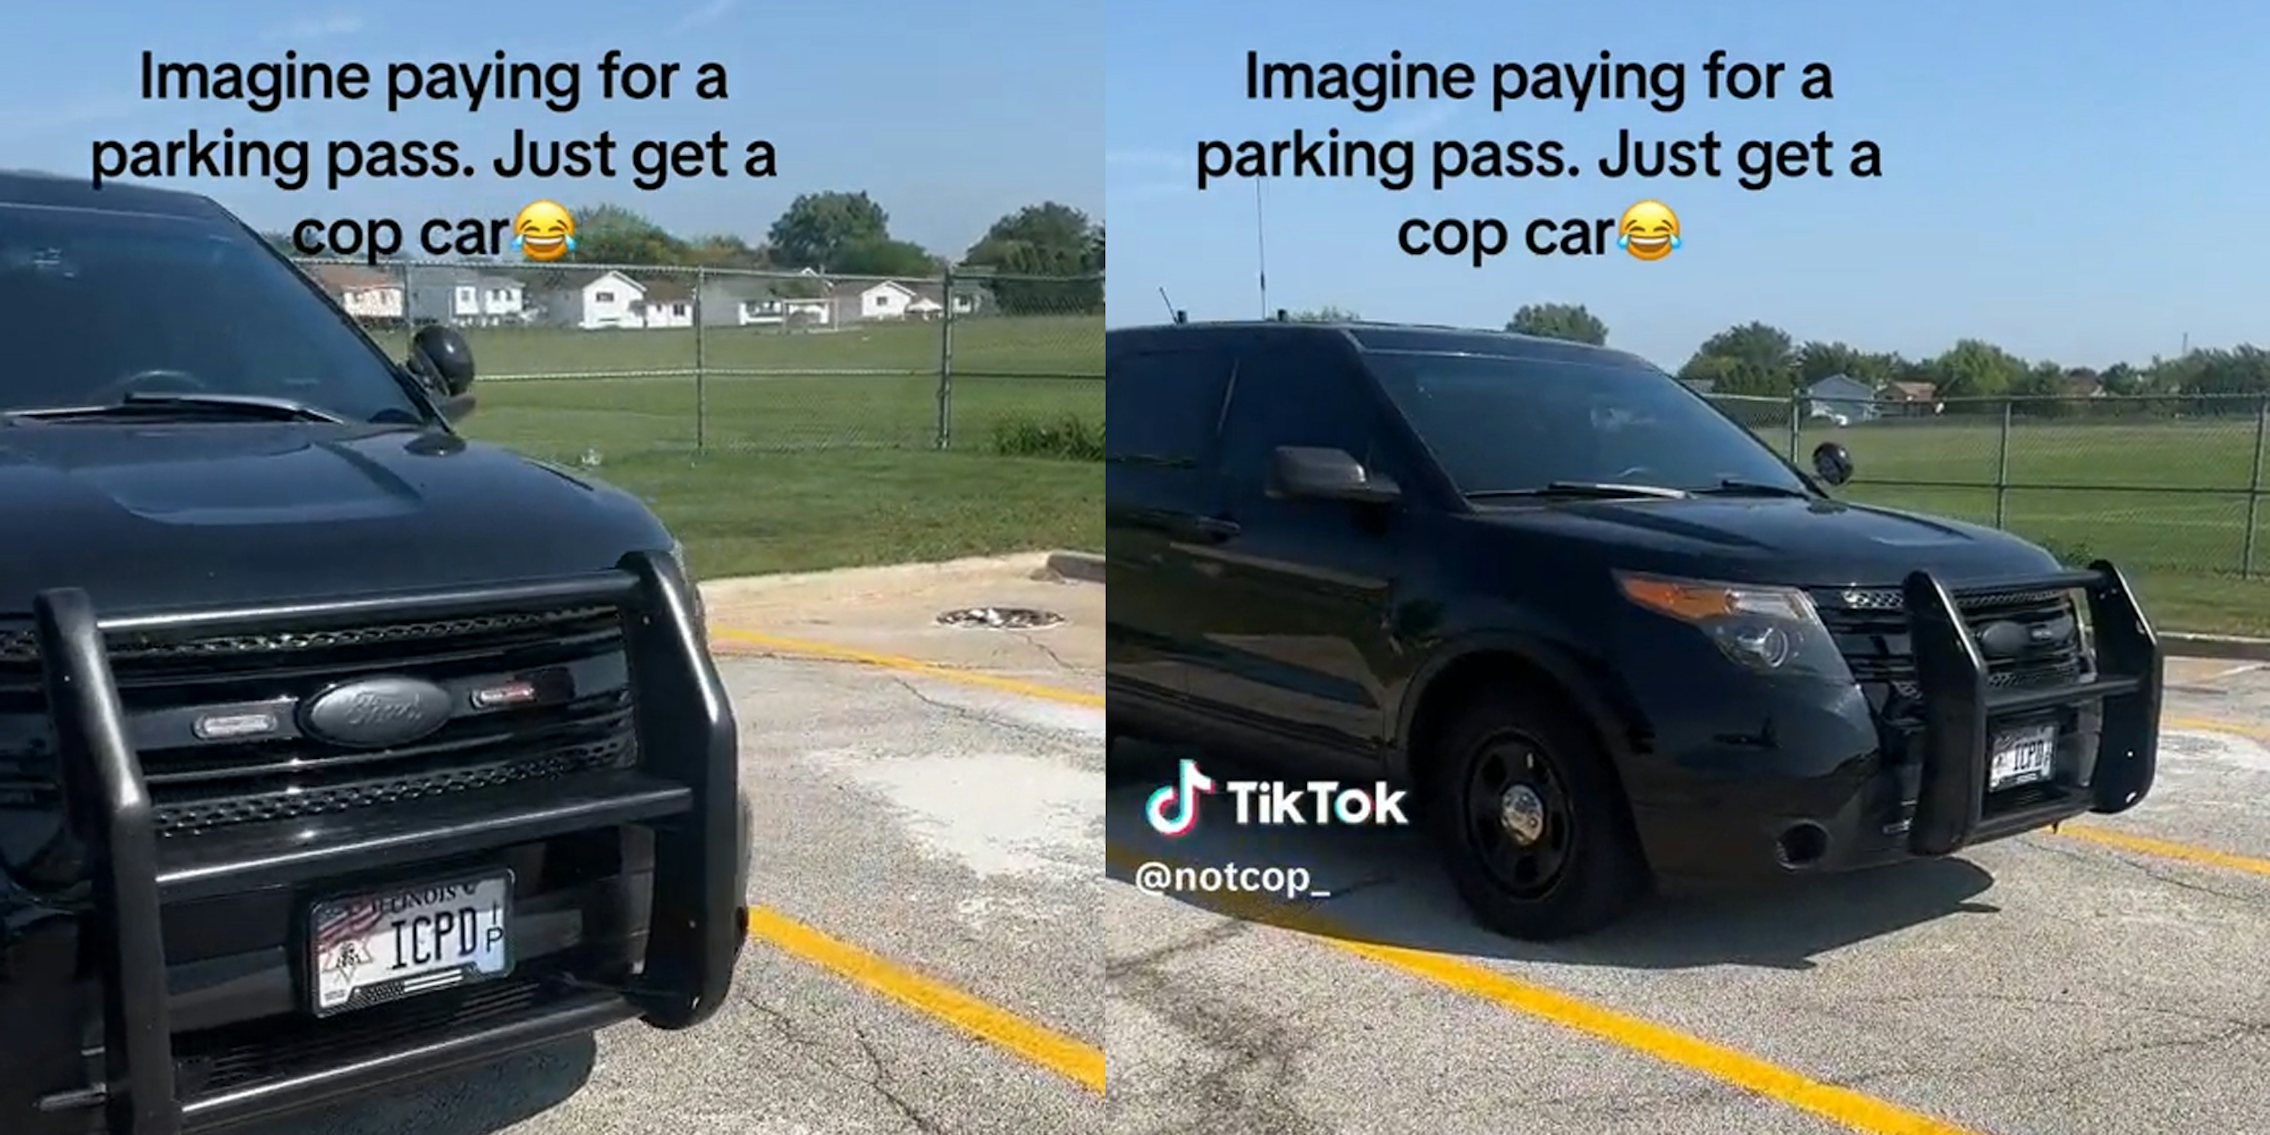 police car in parking lot with caption 'Imagine paying for a parking pass. Just get a cop car'